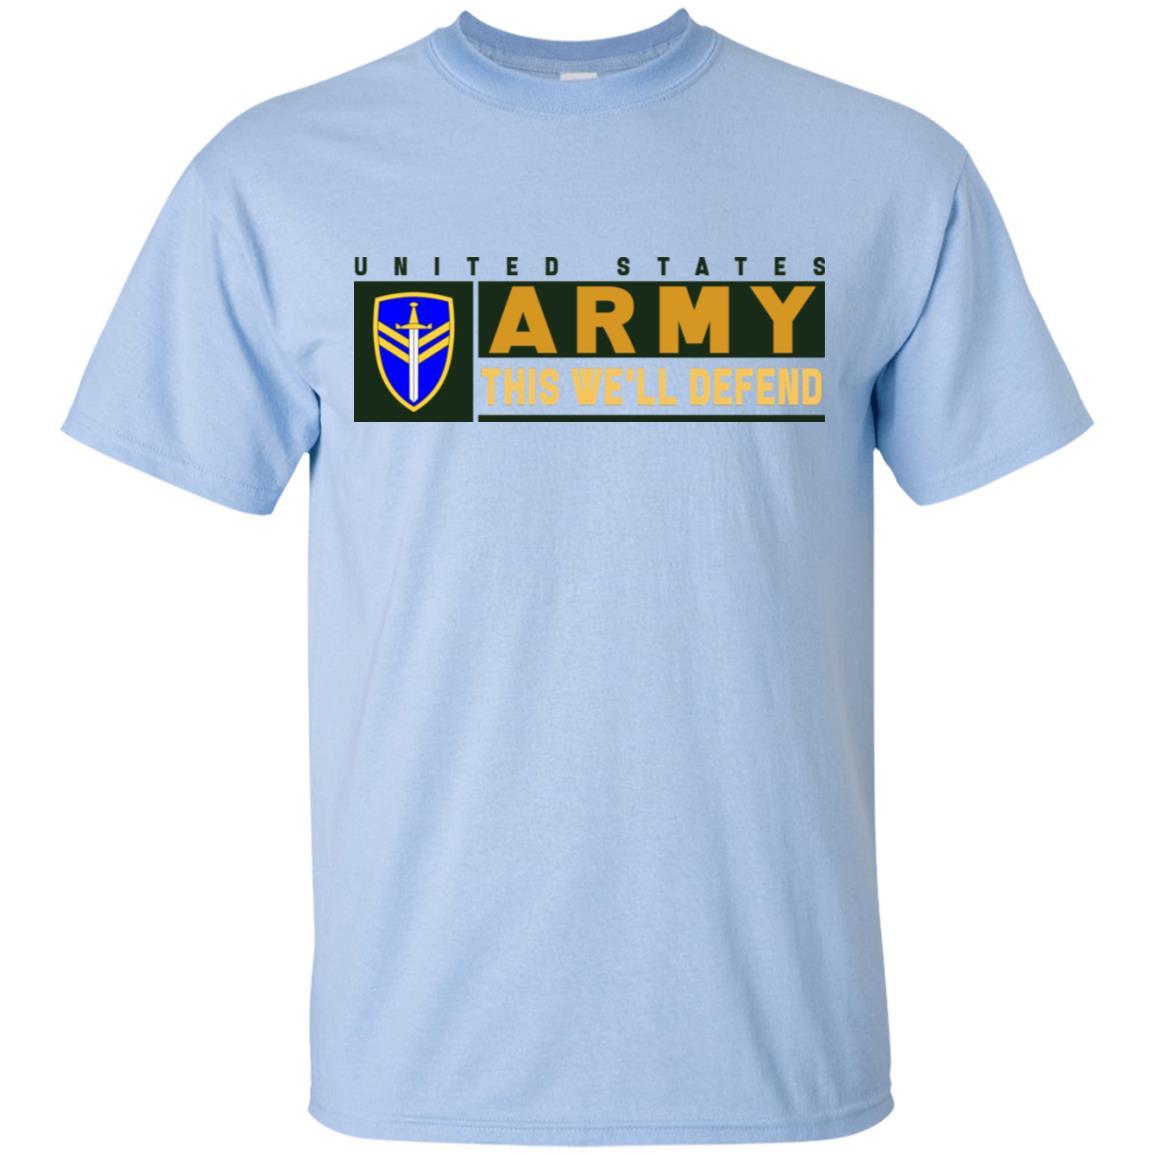 US Army 2ND SUPPORT COMMAND- This We'll Defend T-Shirt On Front For Men-TShirt-Army-Veterans Nation